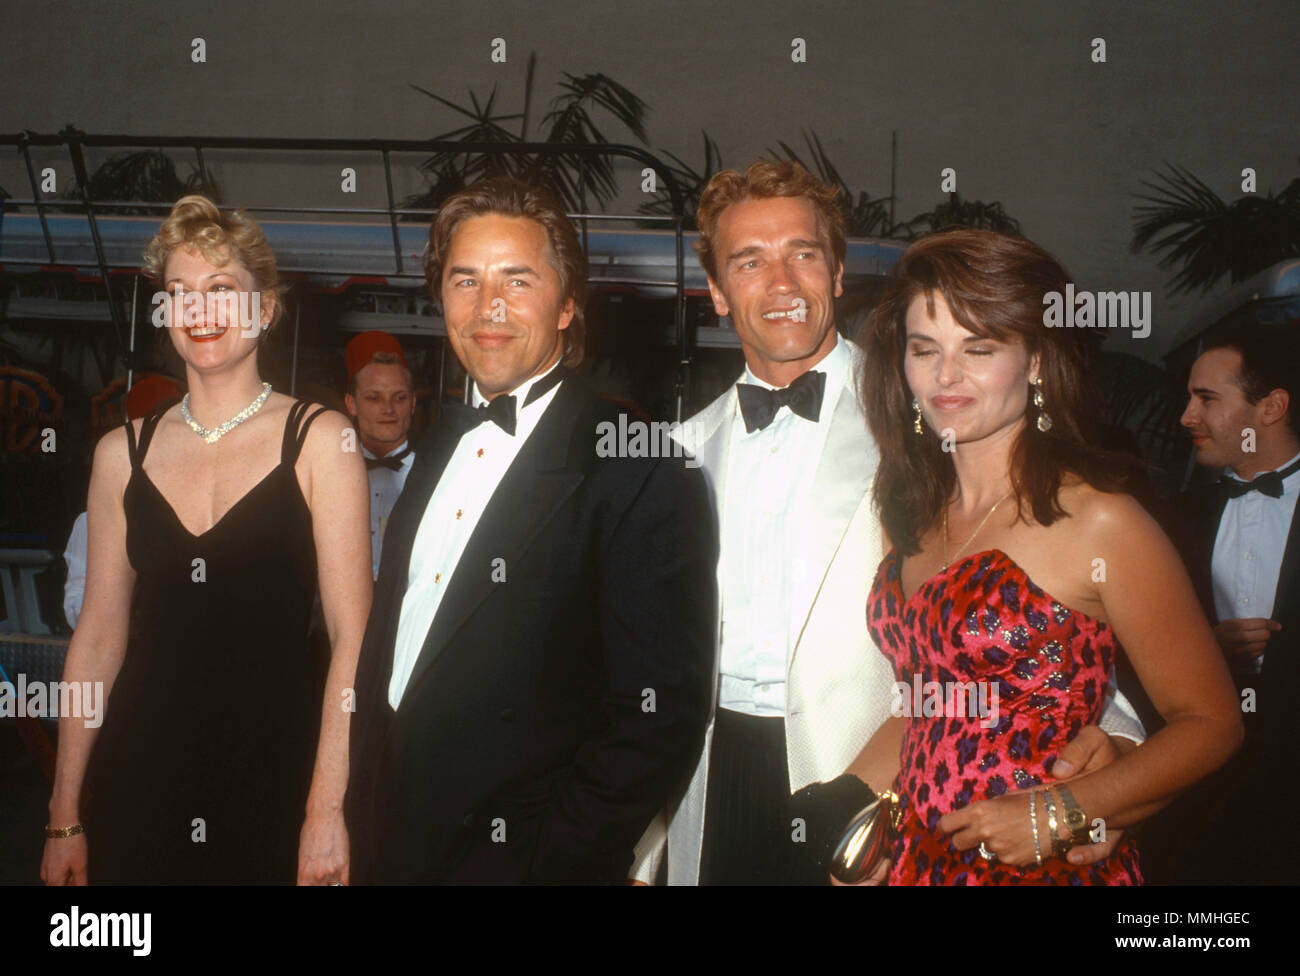 BURBANK, CA - JUNE 02: (L-R) Actress Melanie Griffith, actor Don Johnson, actor Arnold Schwarzenegger and Maria Shriver attend Warner Bros. Studio Rededication event at Warner Bros. Studios on June 2, 1990 in Burbank, California. Photo by Barry King/Alamy Stock Photo Stock Photo